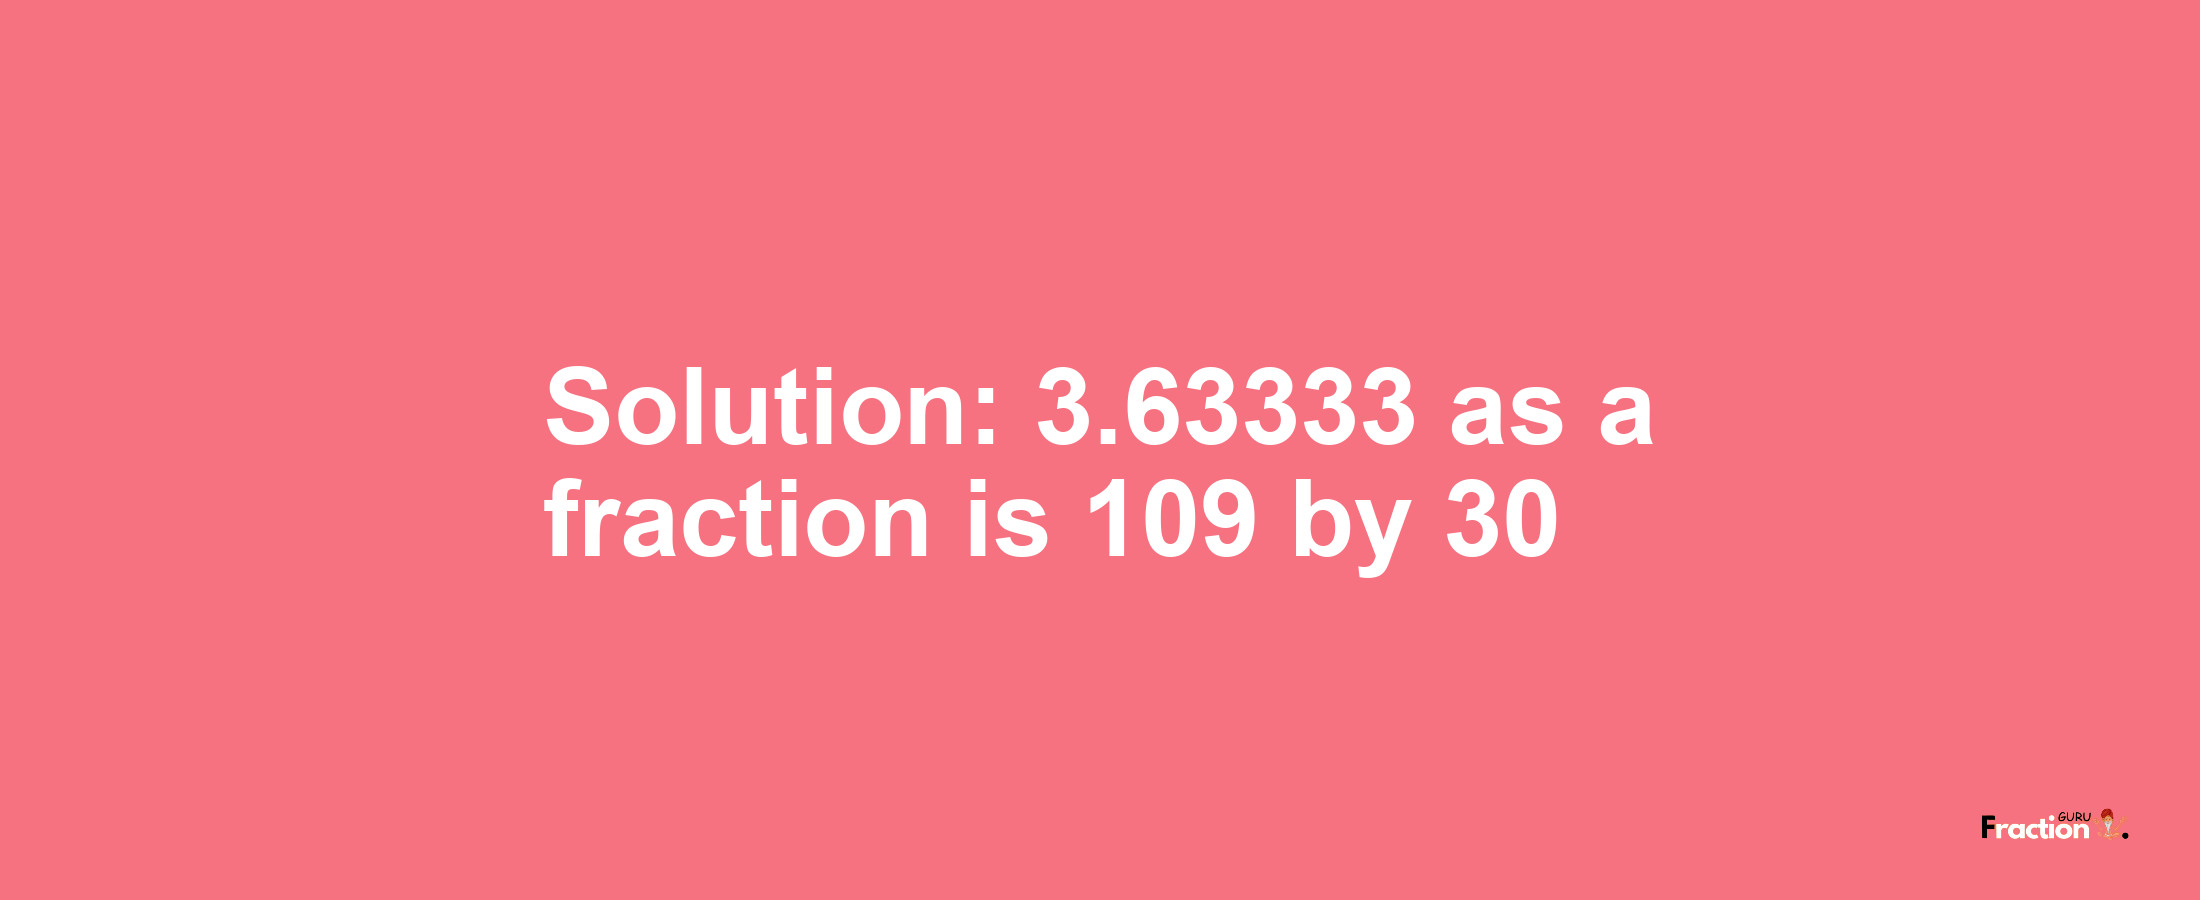 Solution:3.63333 as a fraction is 109/30